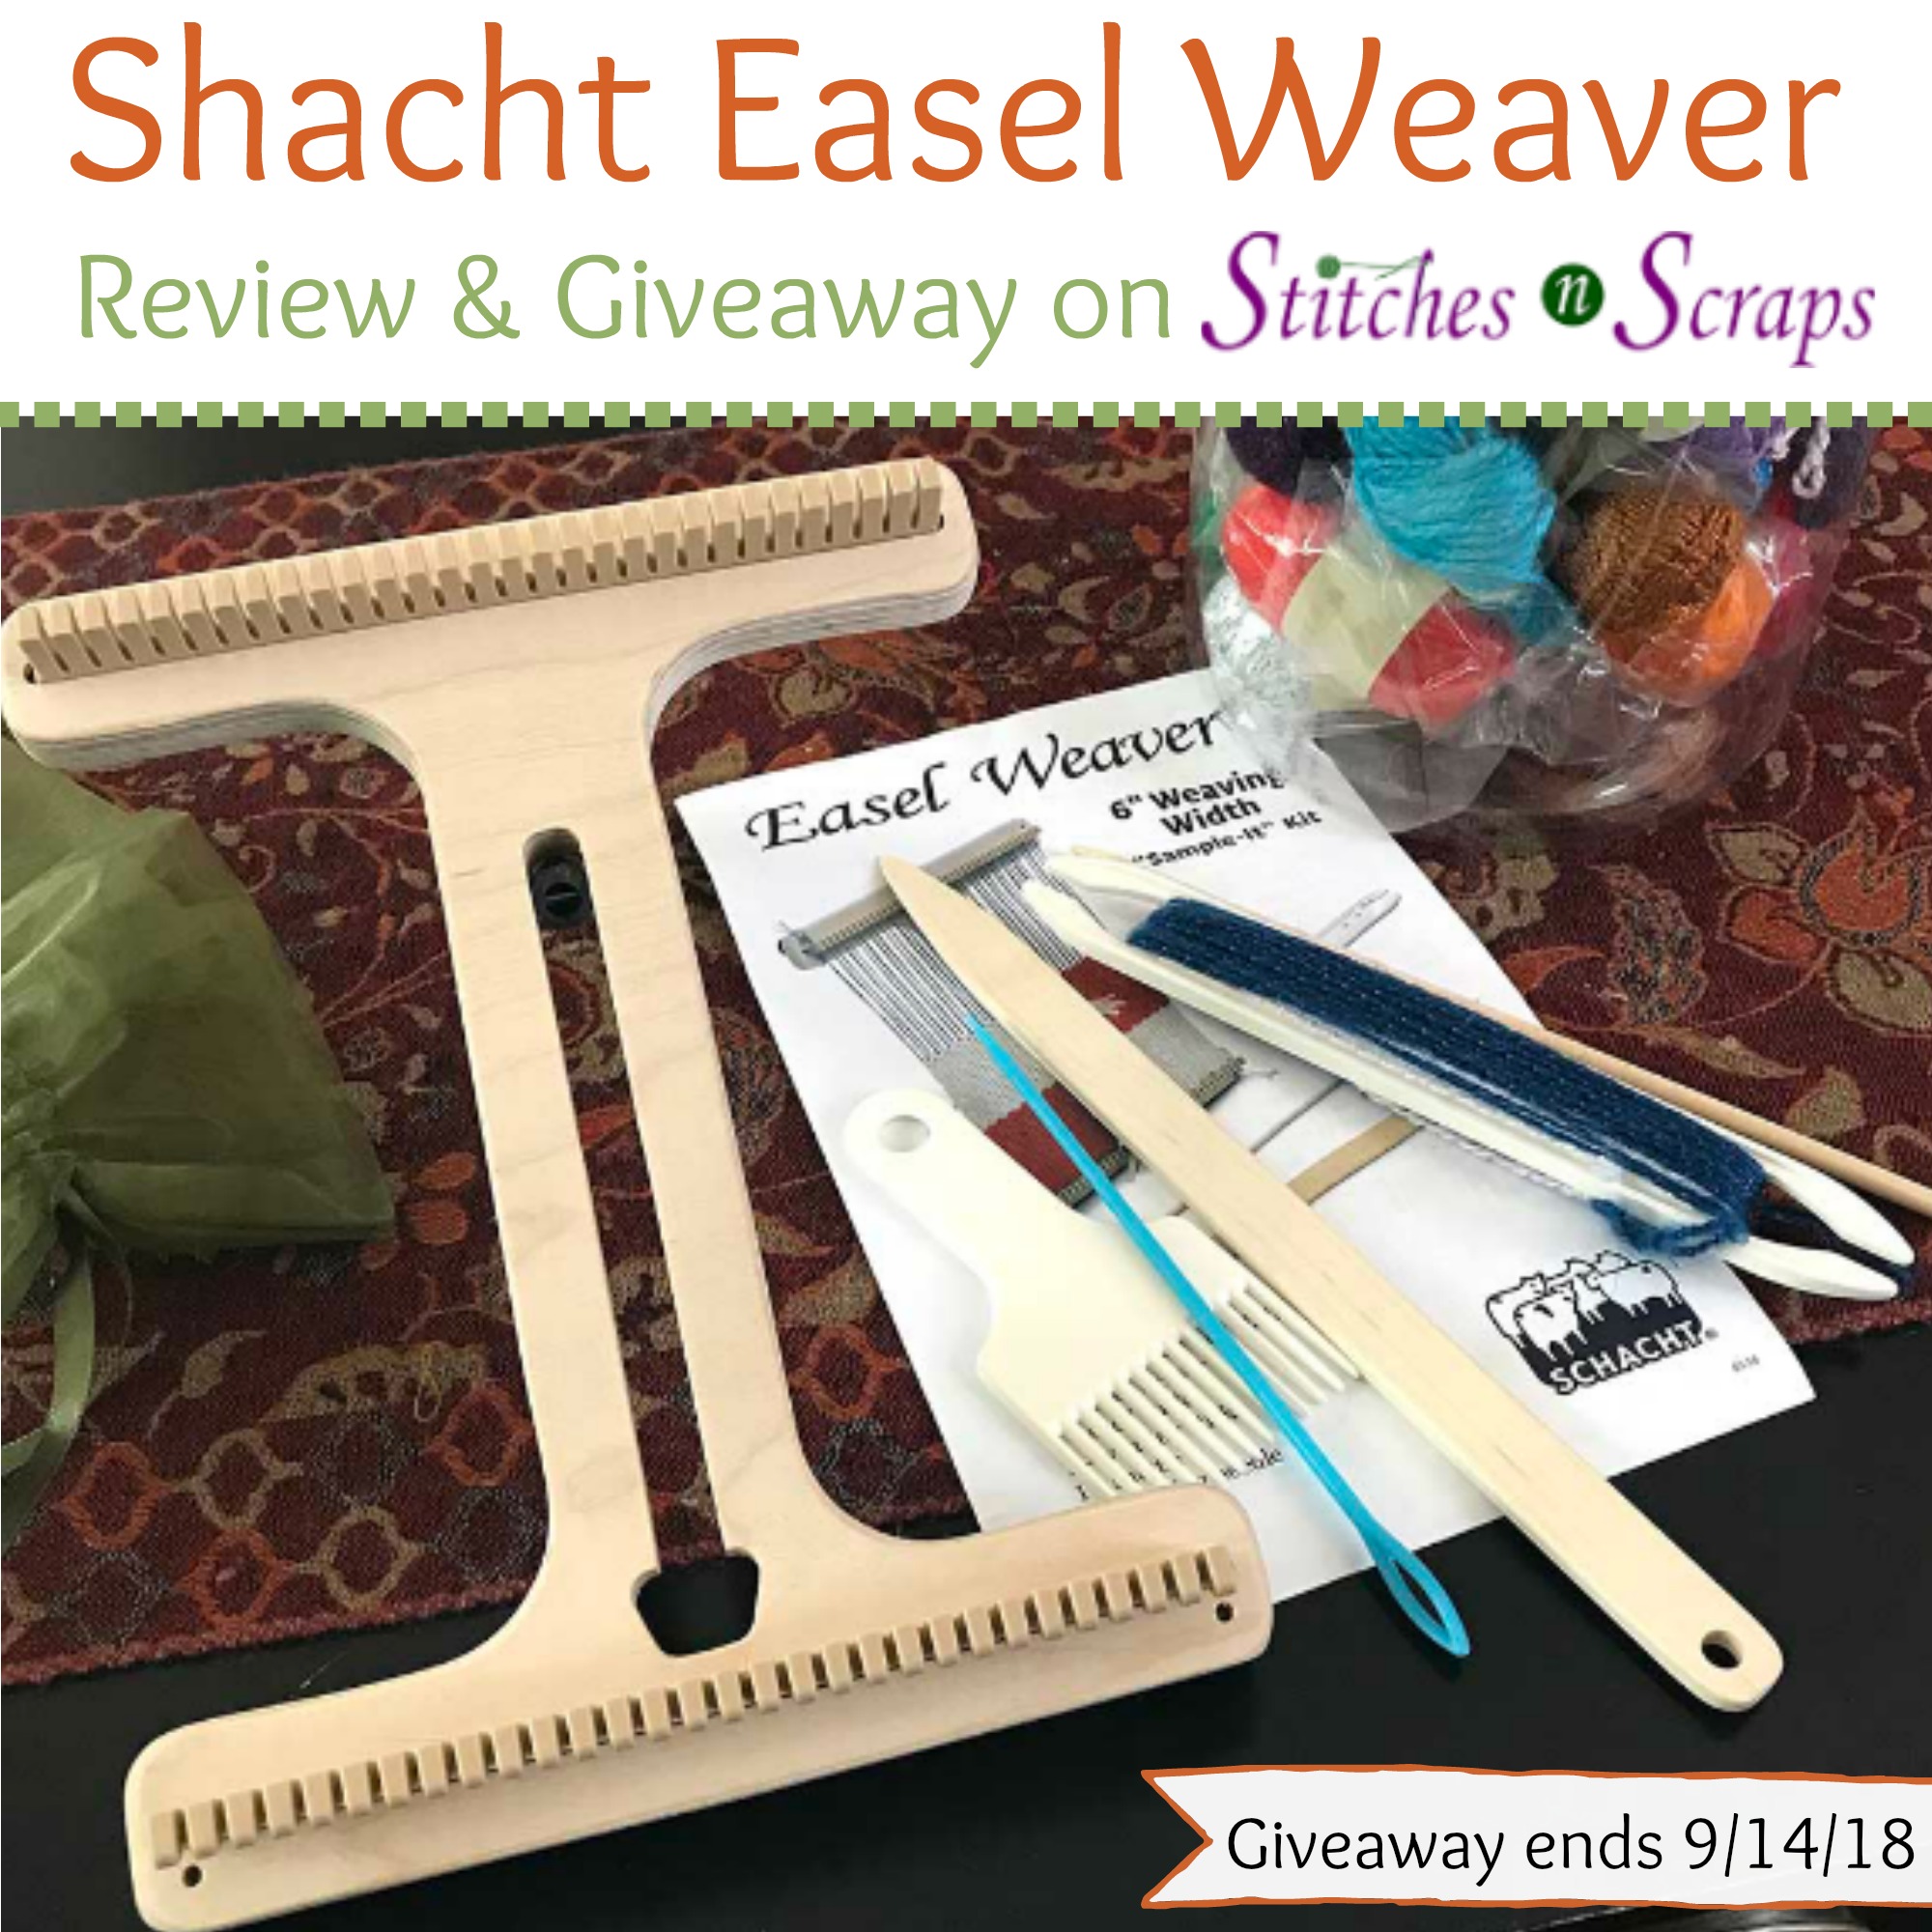 Schacht Easel Weaver review and giveaway on Stitches n Scraps